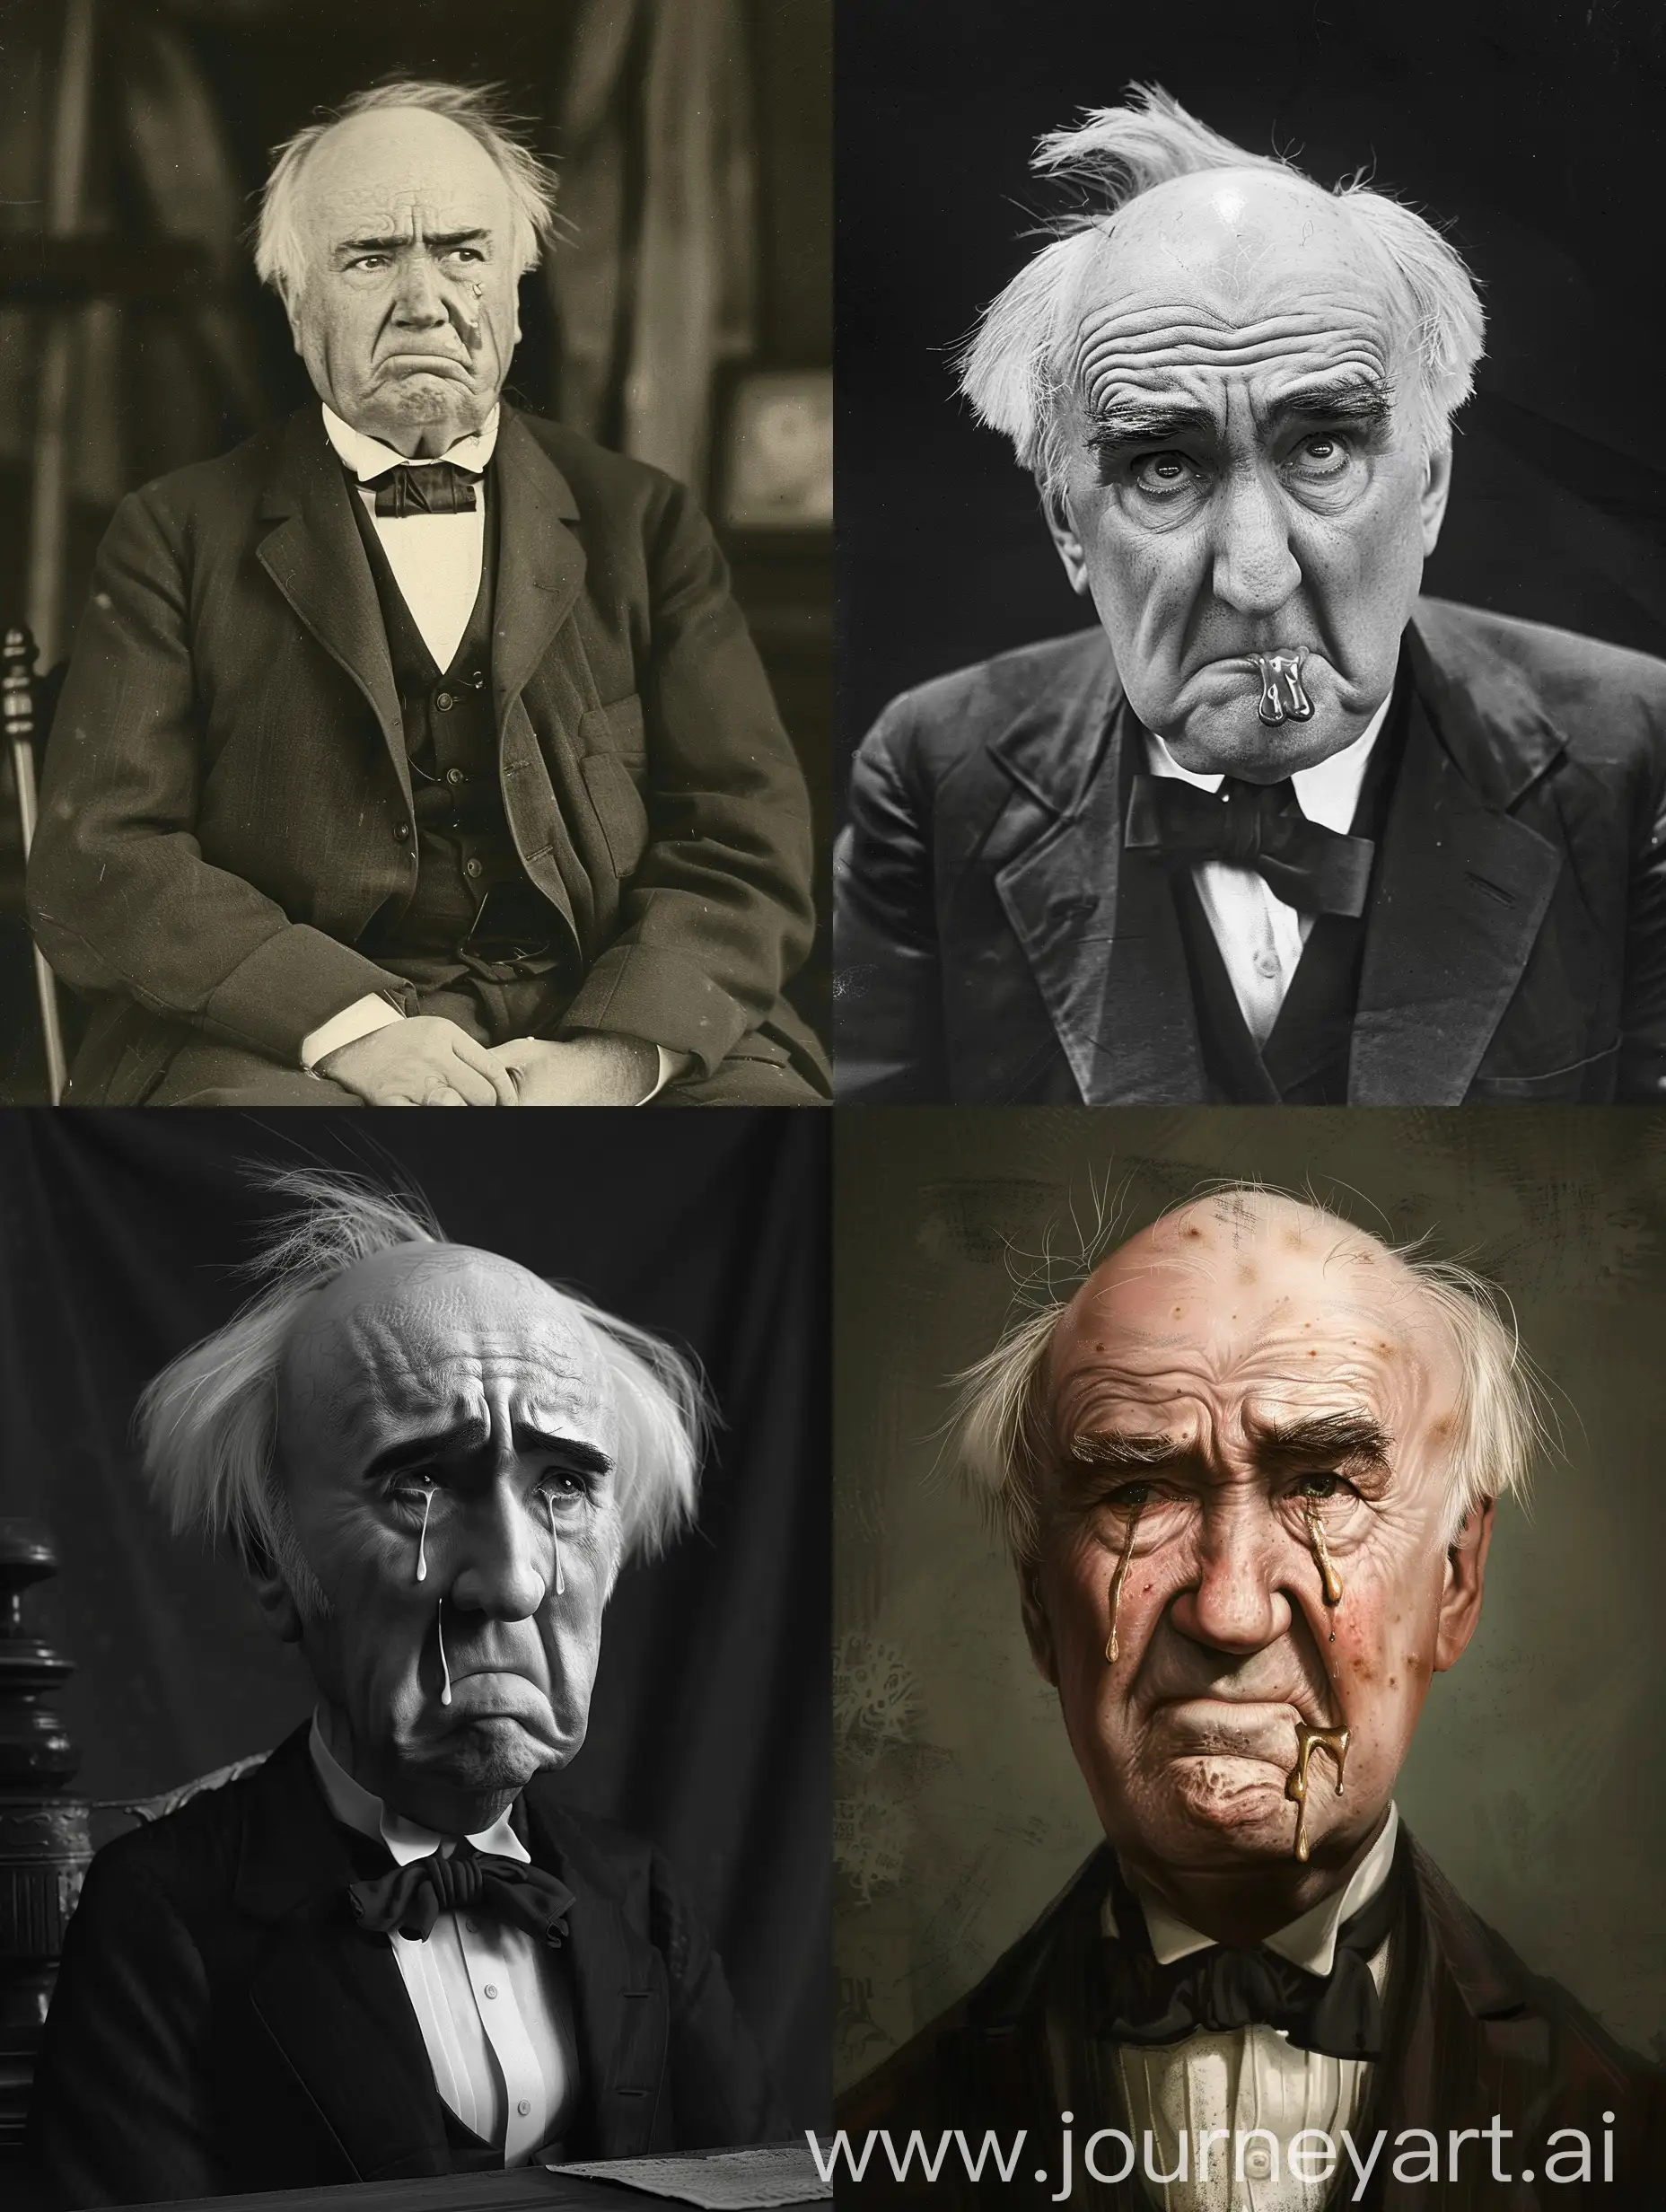 Thomas Edison pictured as a crying soyjak